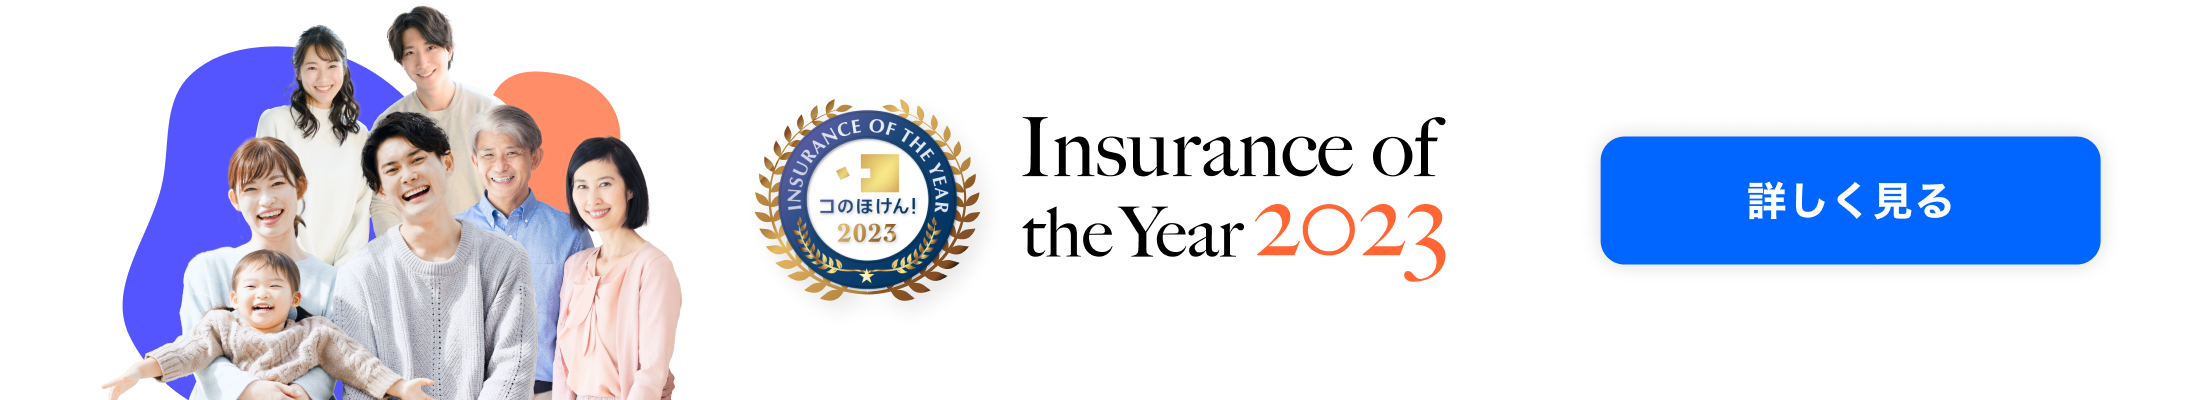 Insurance of the year 2023